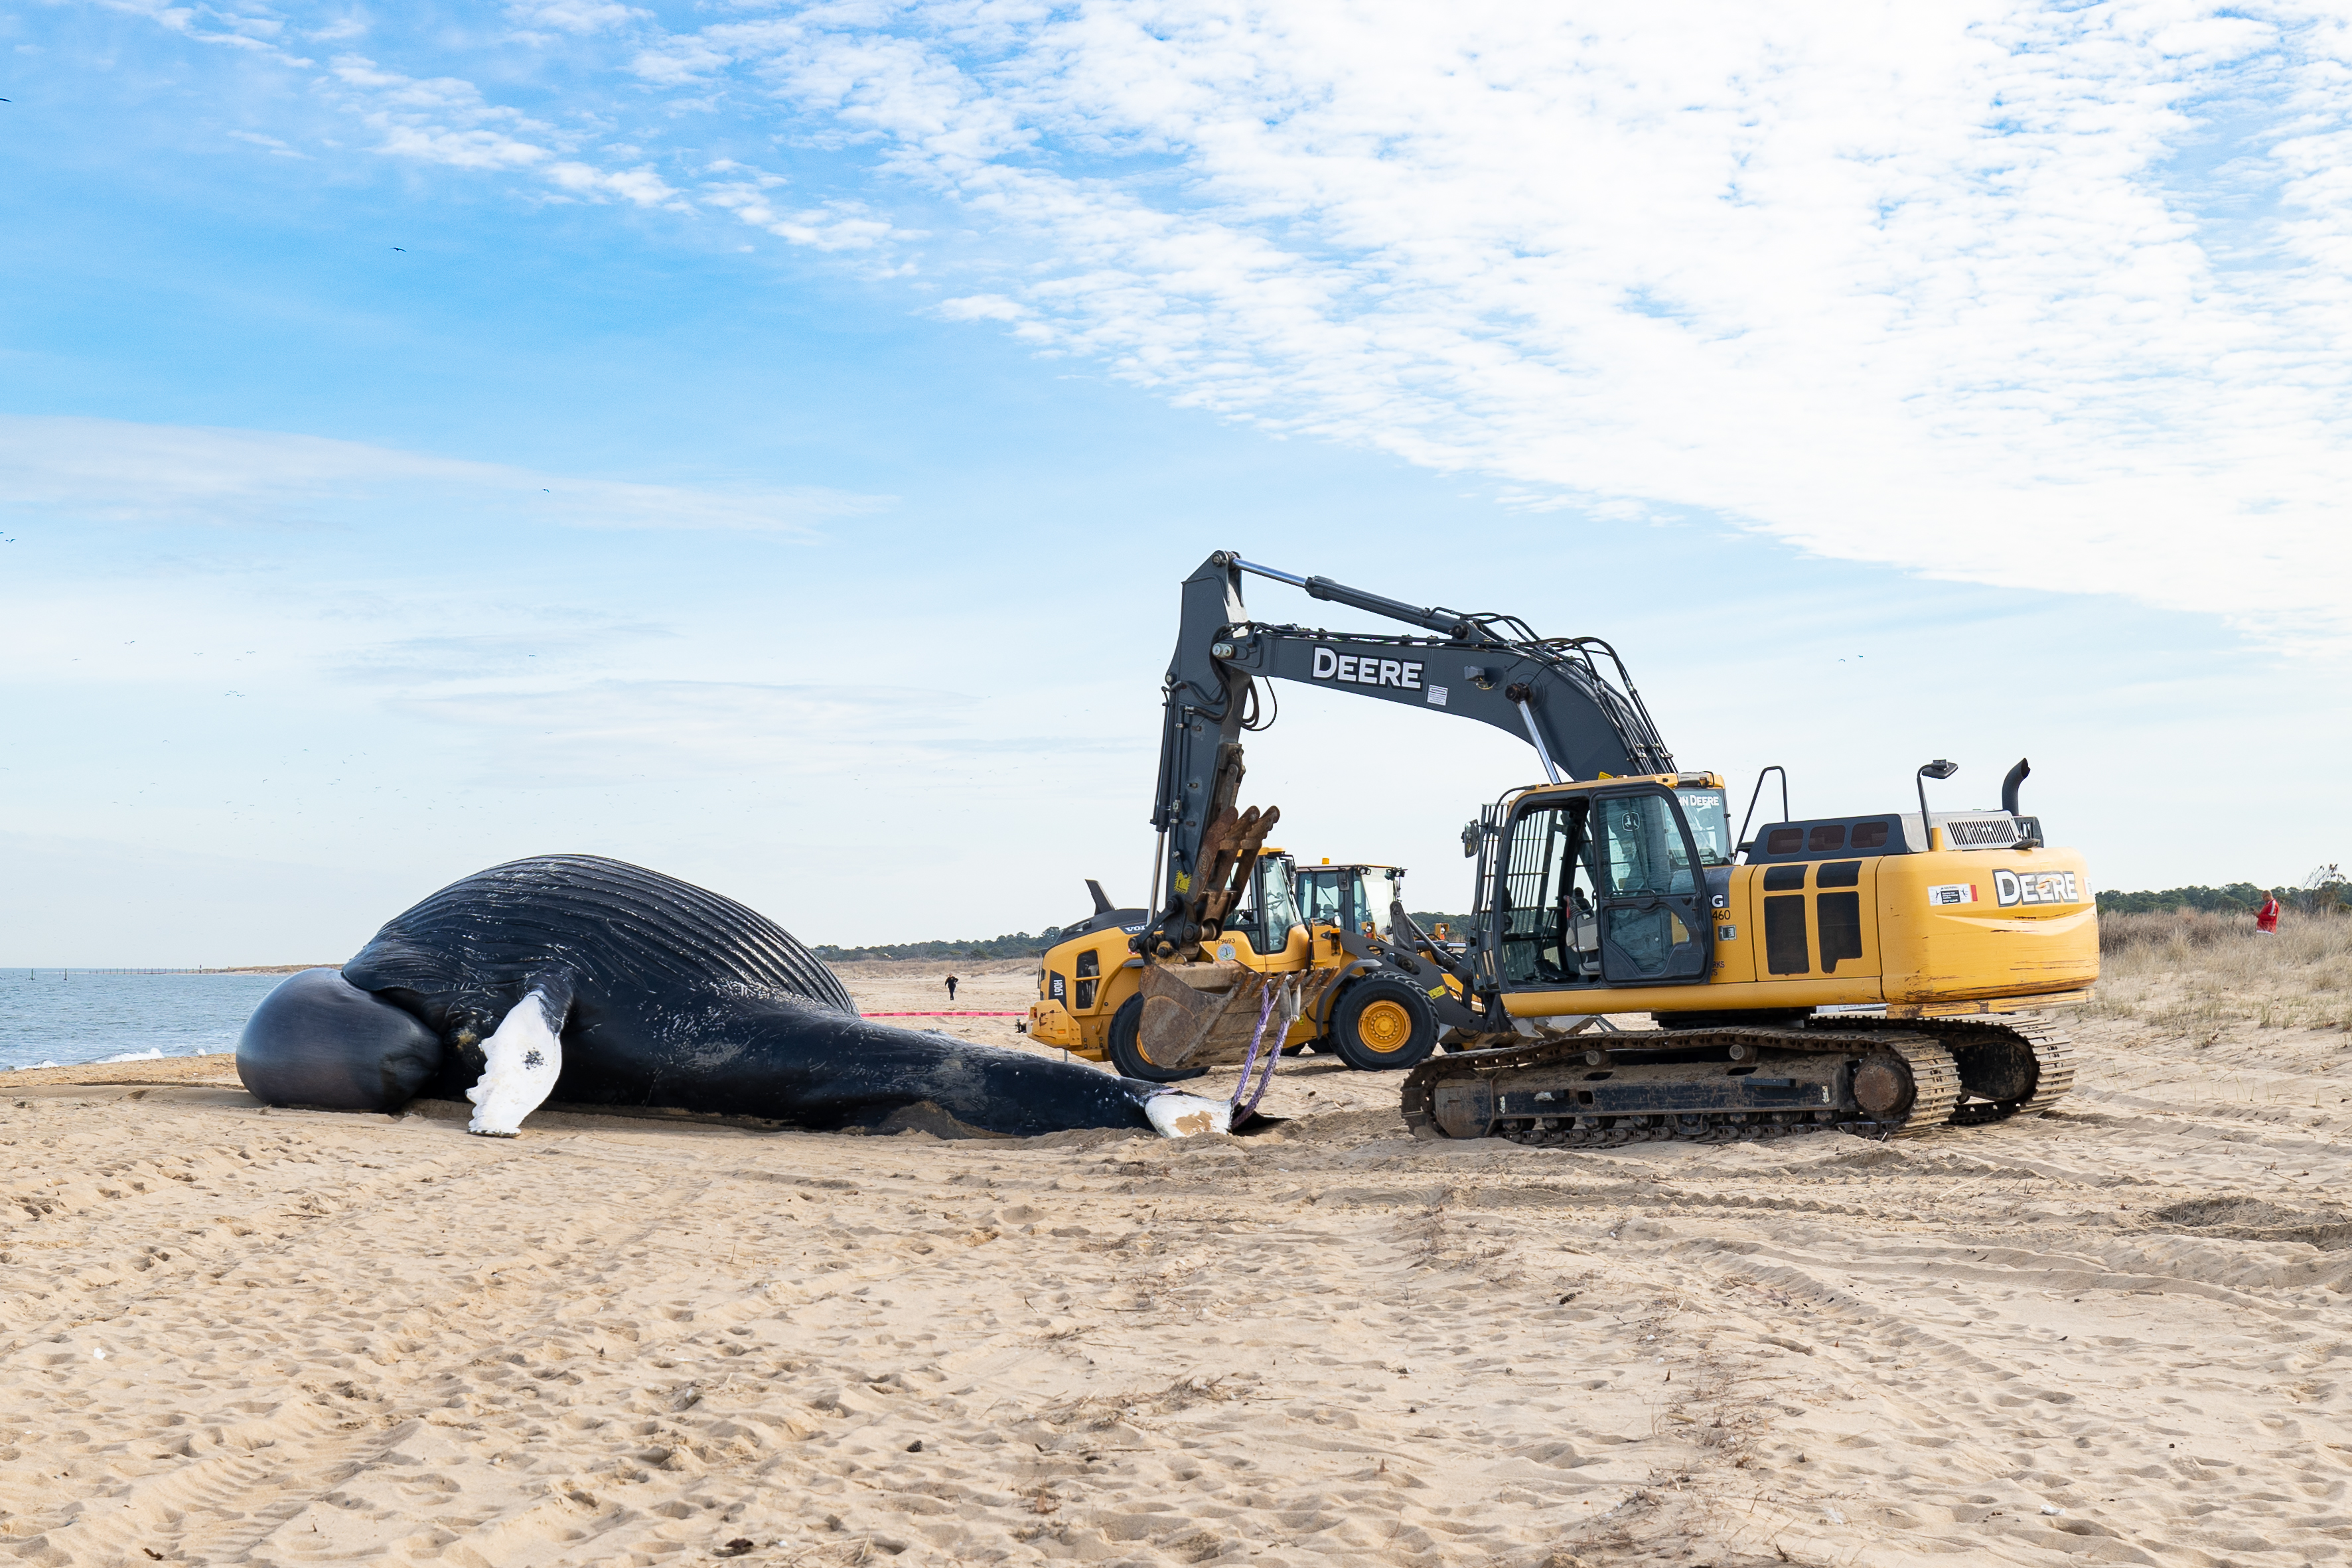 Heavy machinery is used to move a dead humpback whale into a better position to enable a necropsy team to investigate cause of death.